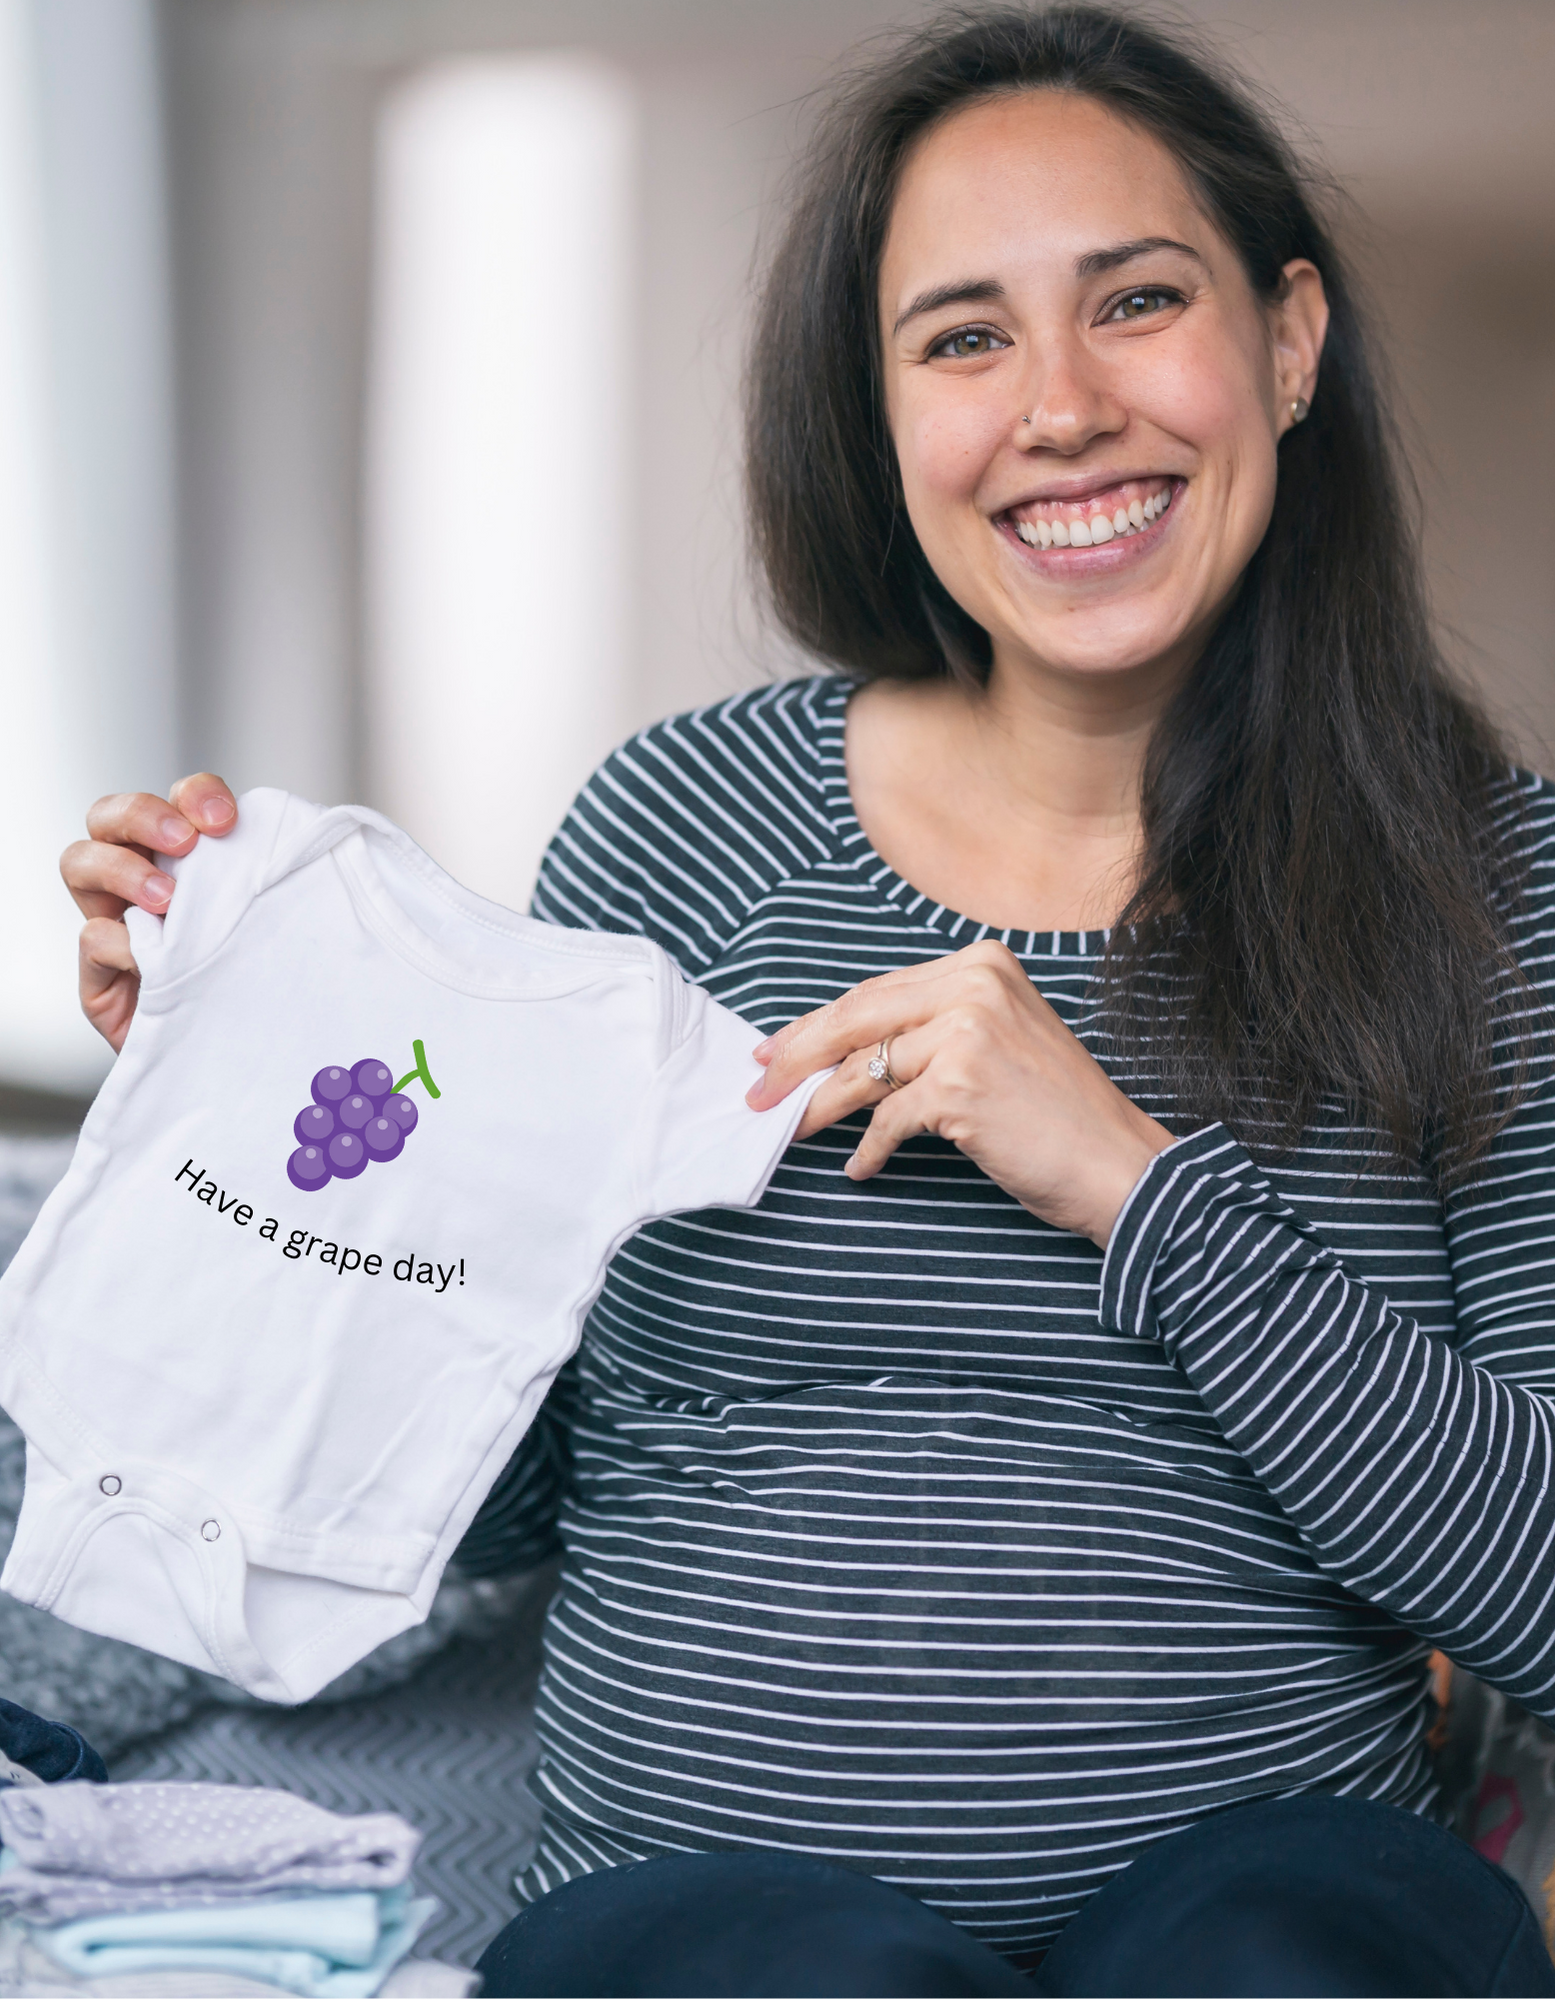 A pregnant women with brown hair, smiling, holding a white baby onesie that says have a grape day and has an image of a bunch of grapes.